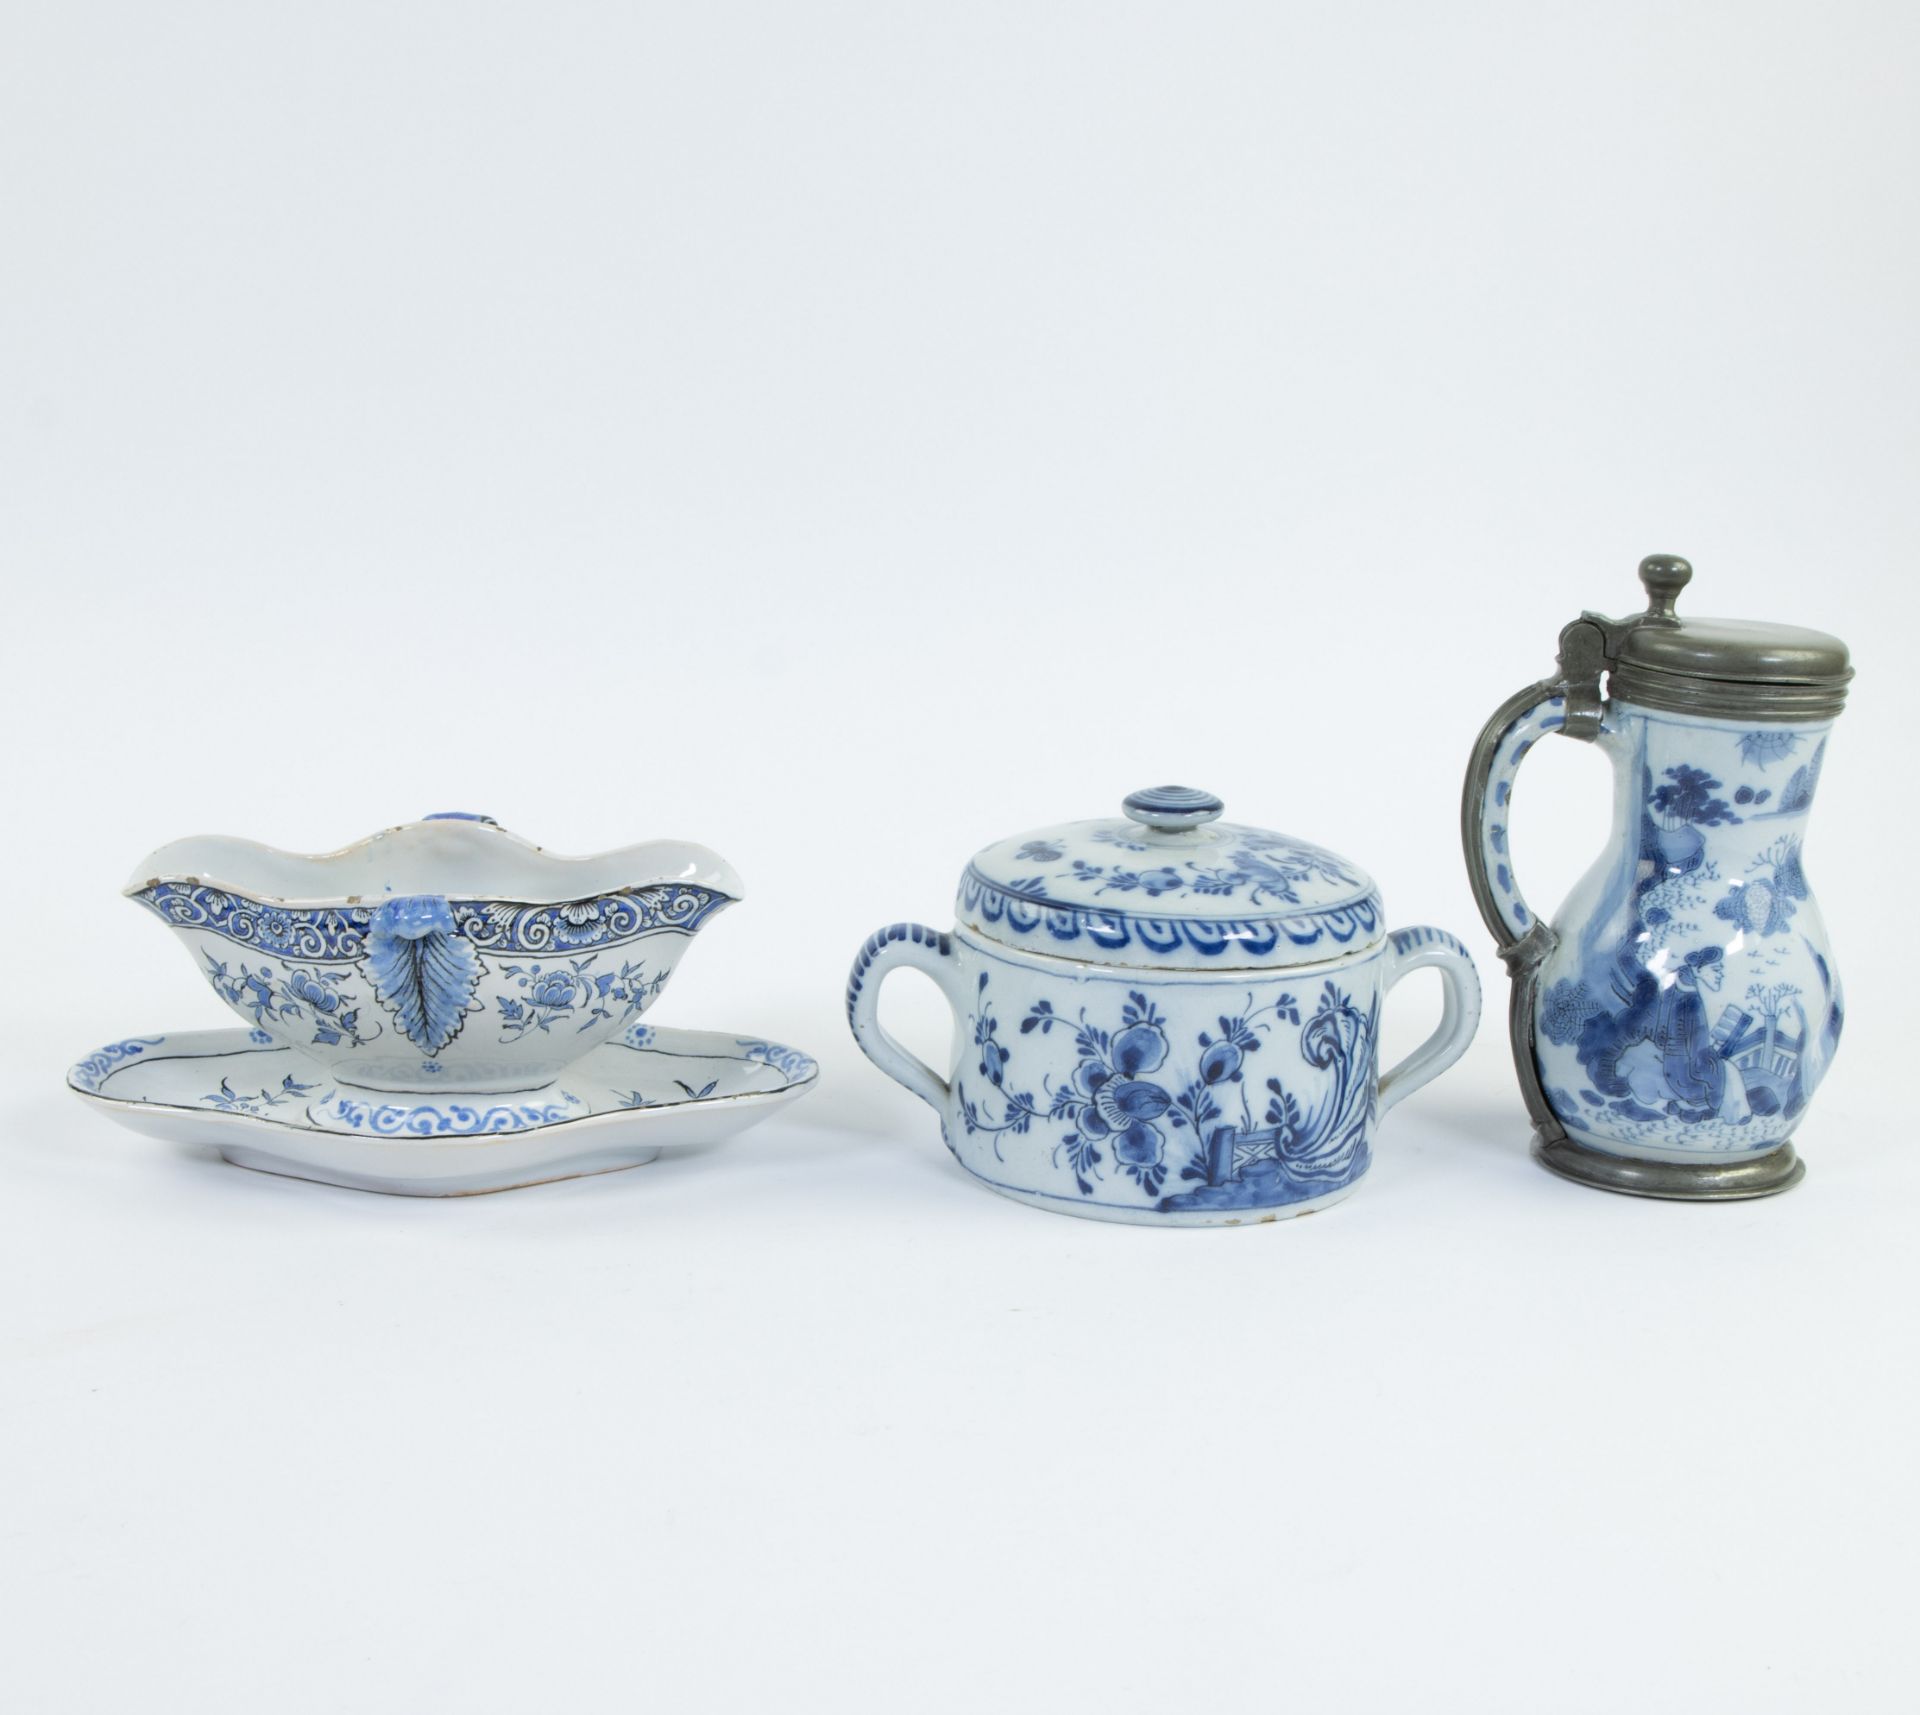 Lot Delft butter pot 18th century, jug circa 1700 and sauce bowl Lille 18th century - Image 3 of 5